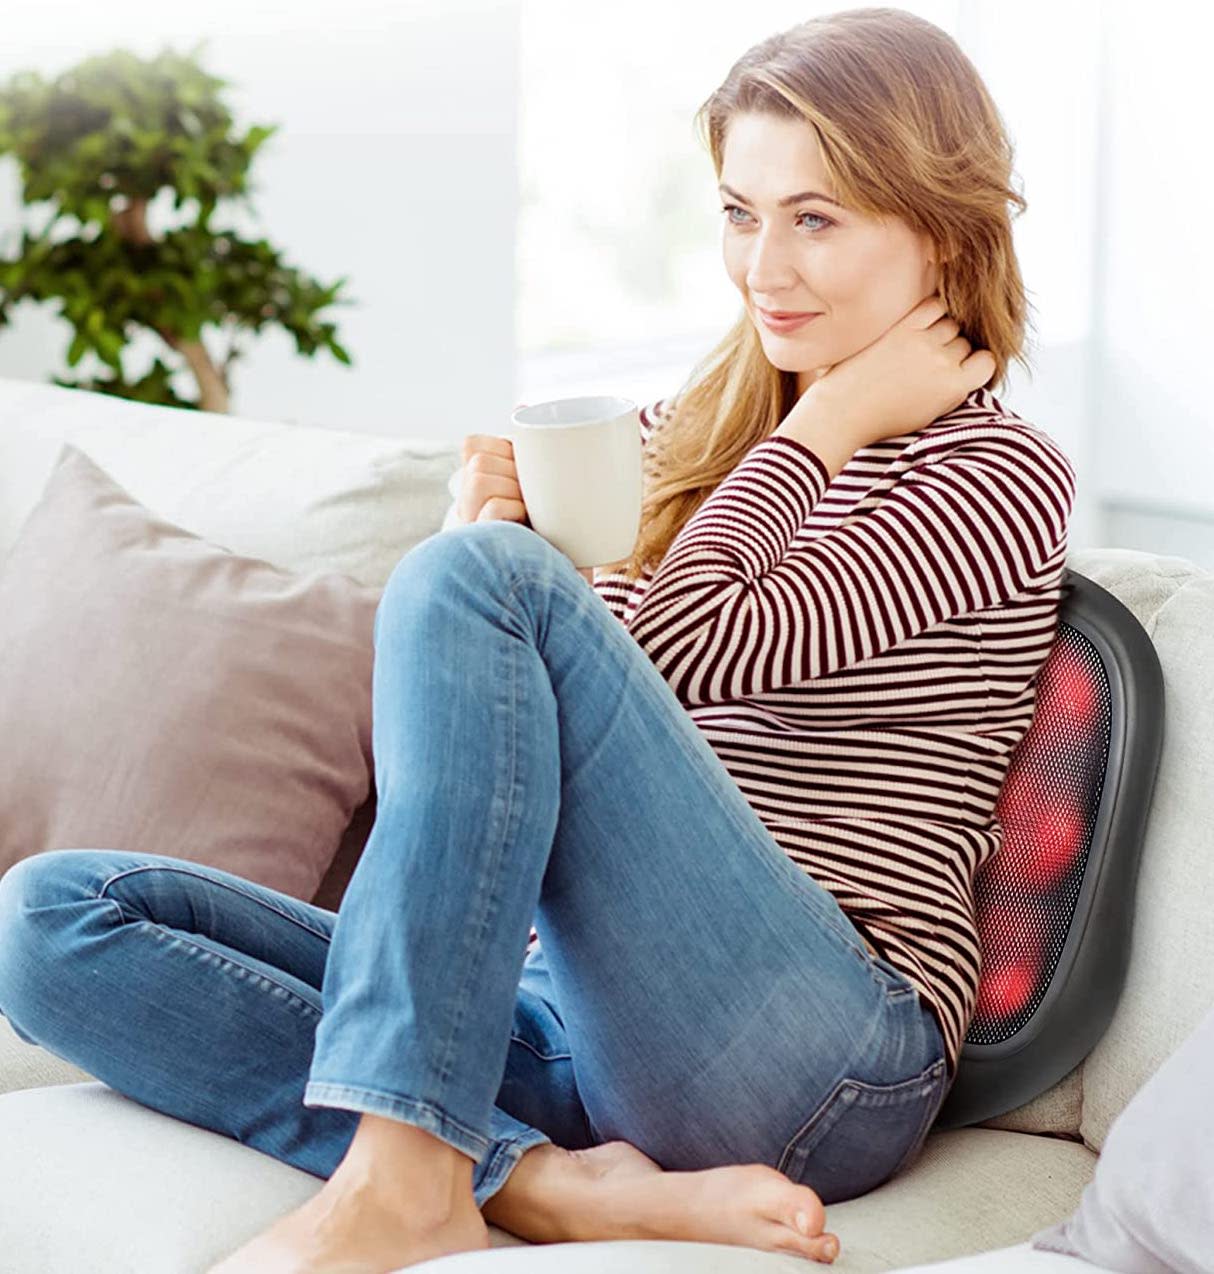 Woman sitting on a couch holding a mug while using a back massager.